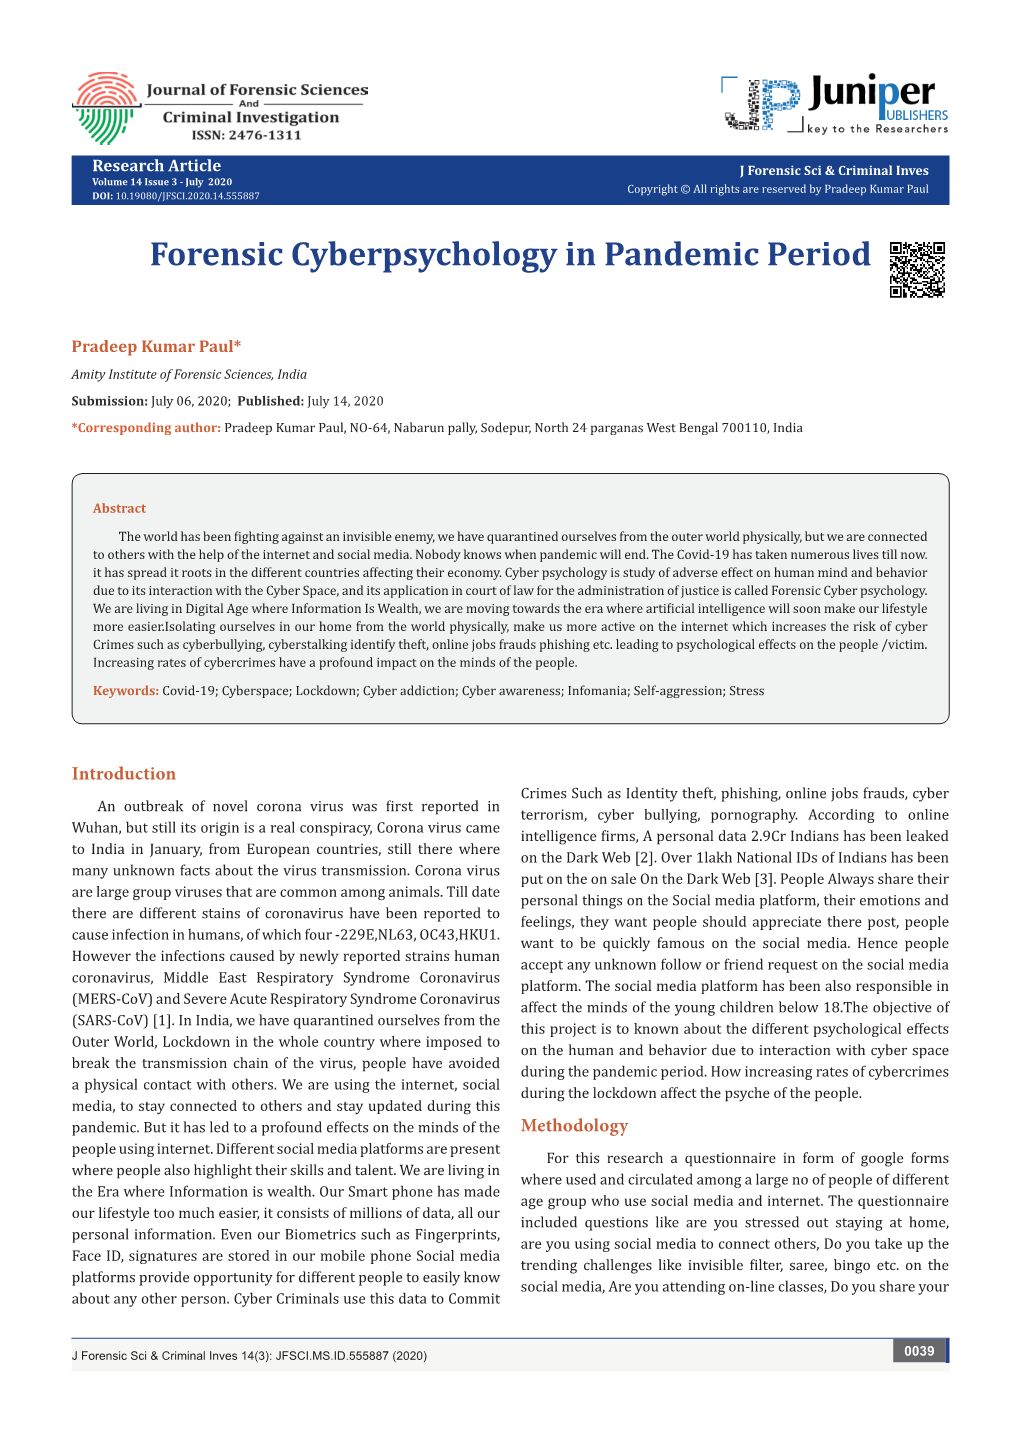 Forensic Cyberpsychology in Pandemic Period